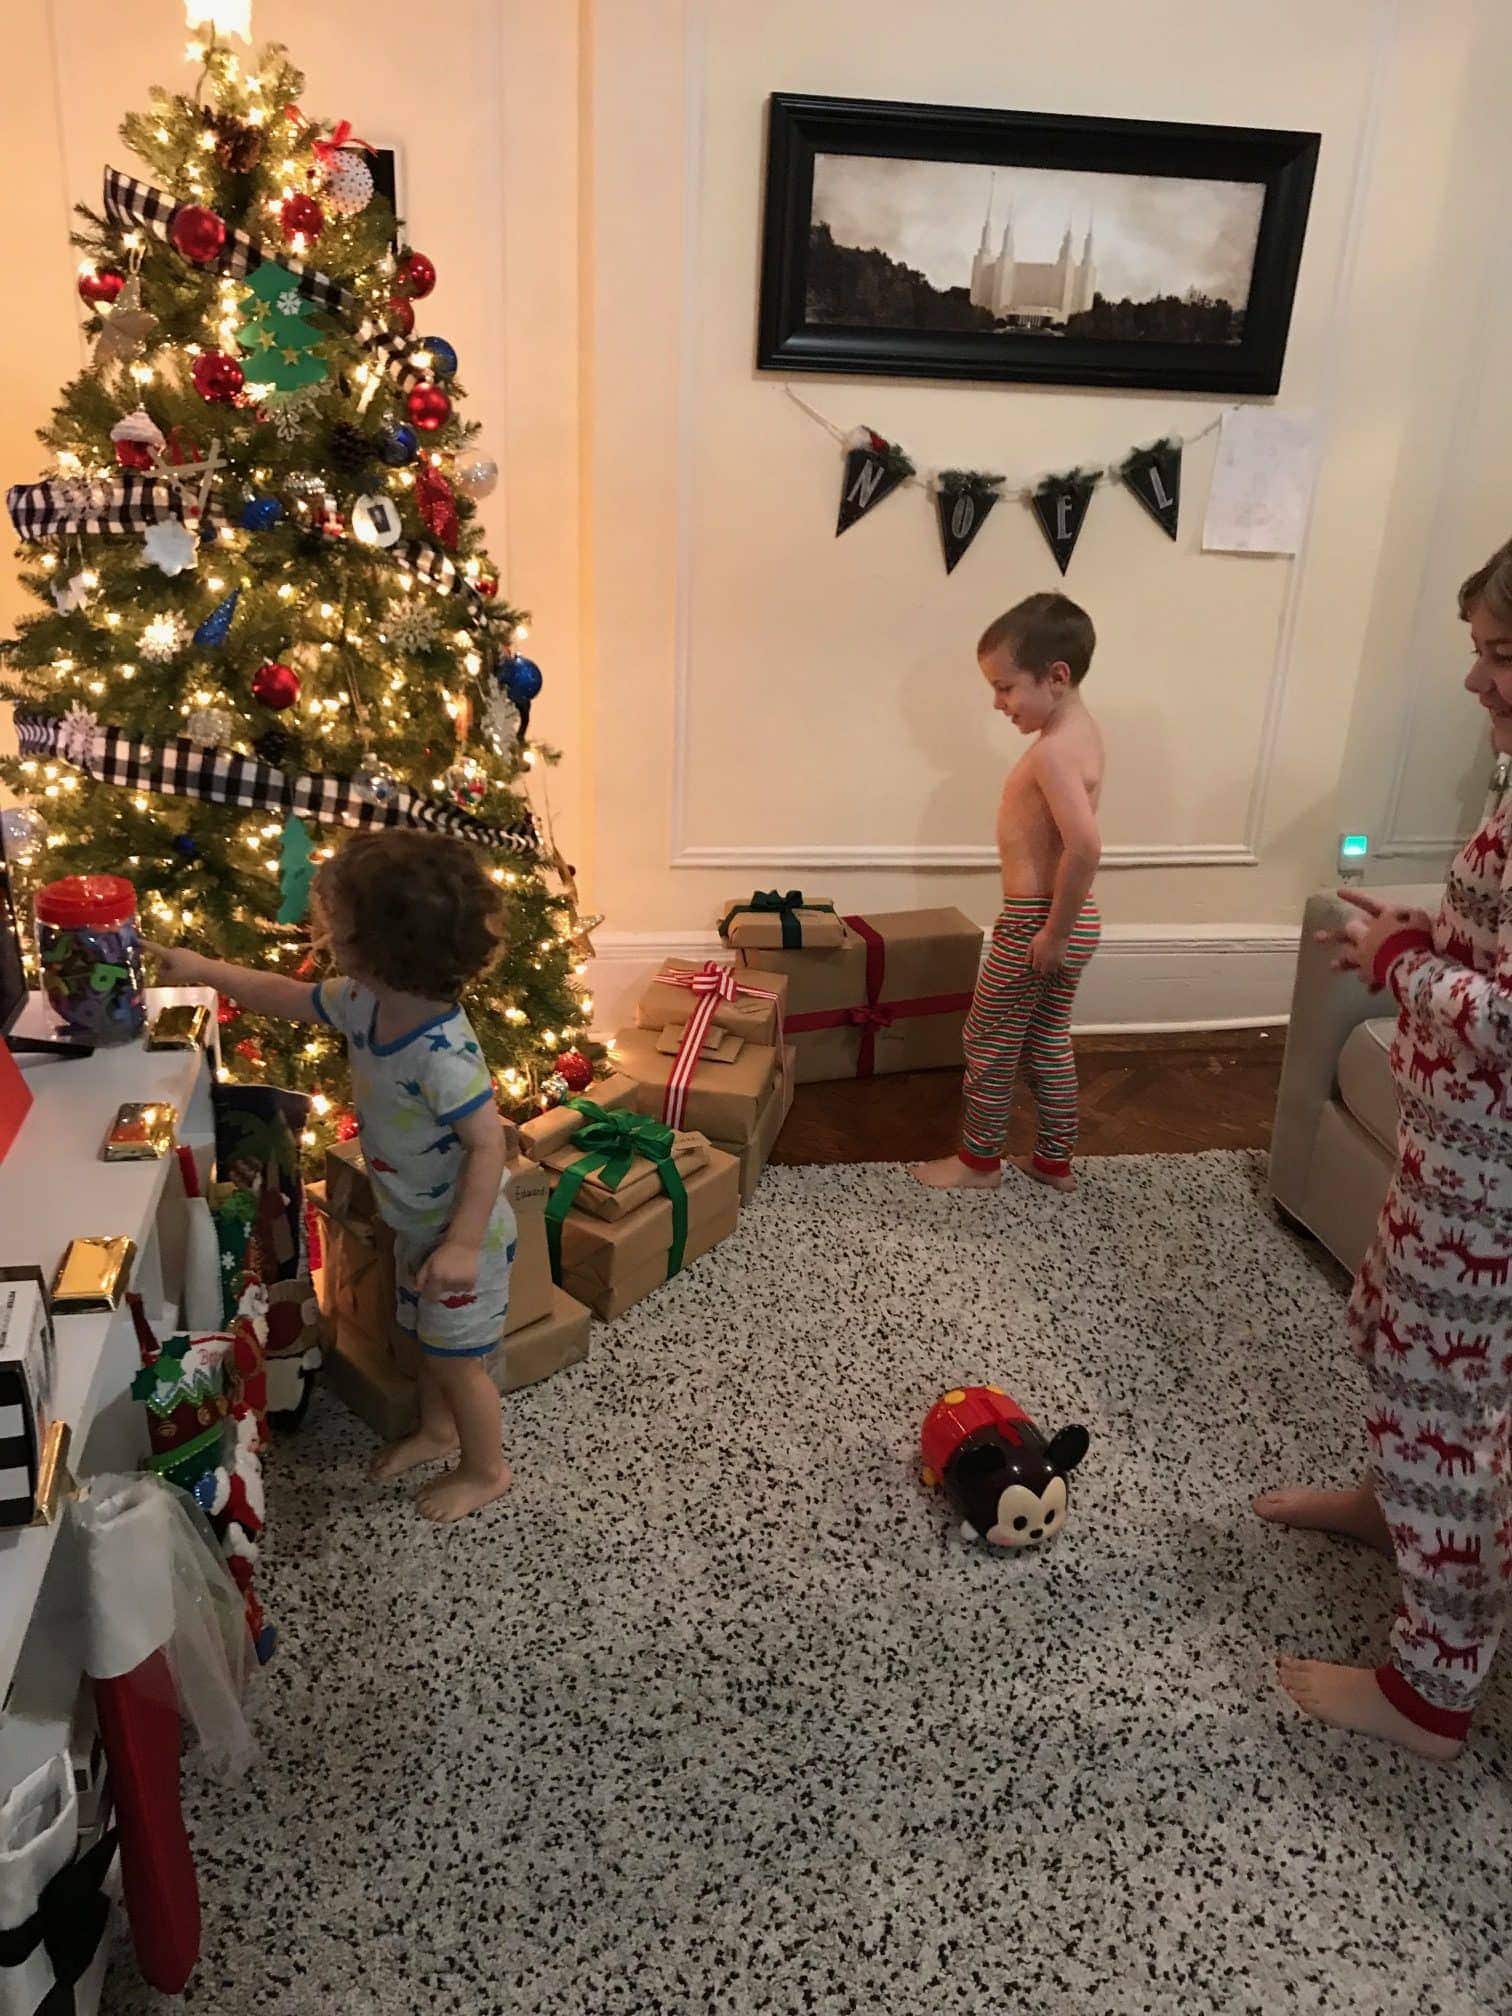 A group of people in a living room with a christmas tree